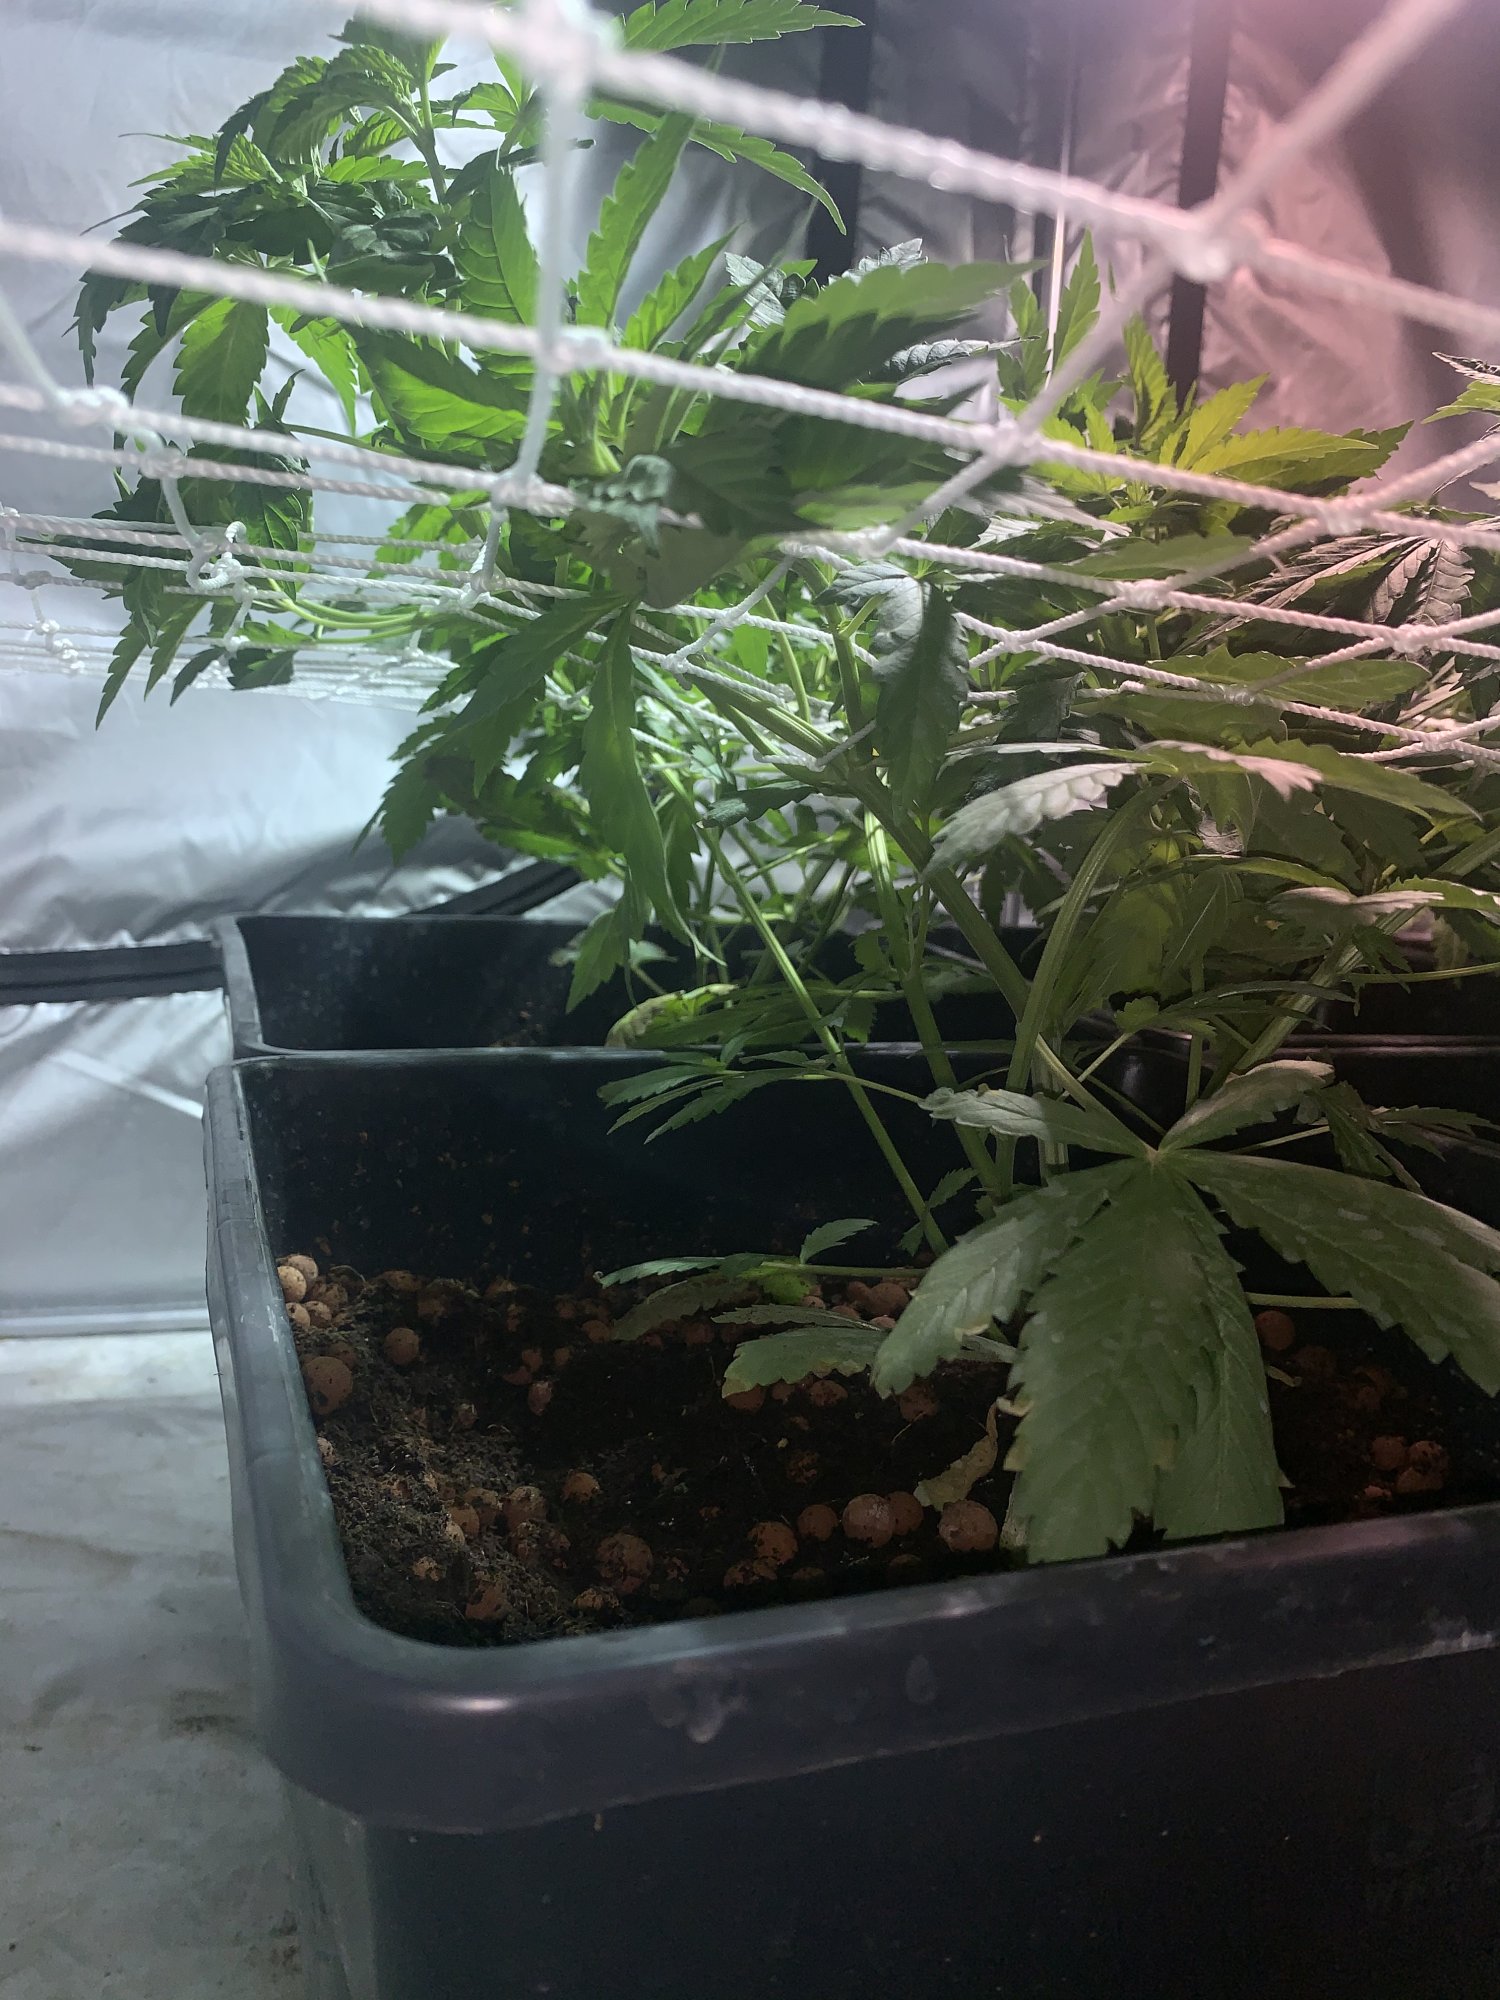 How far to fill the scrog 2